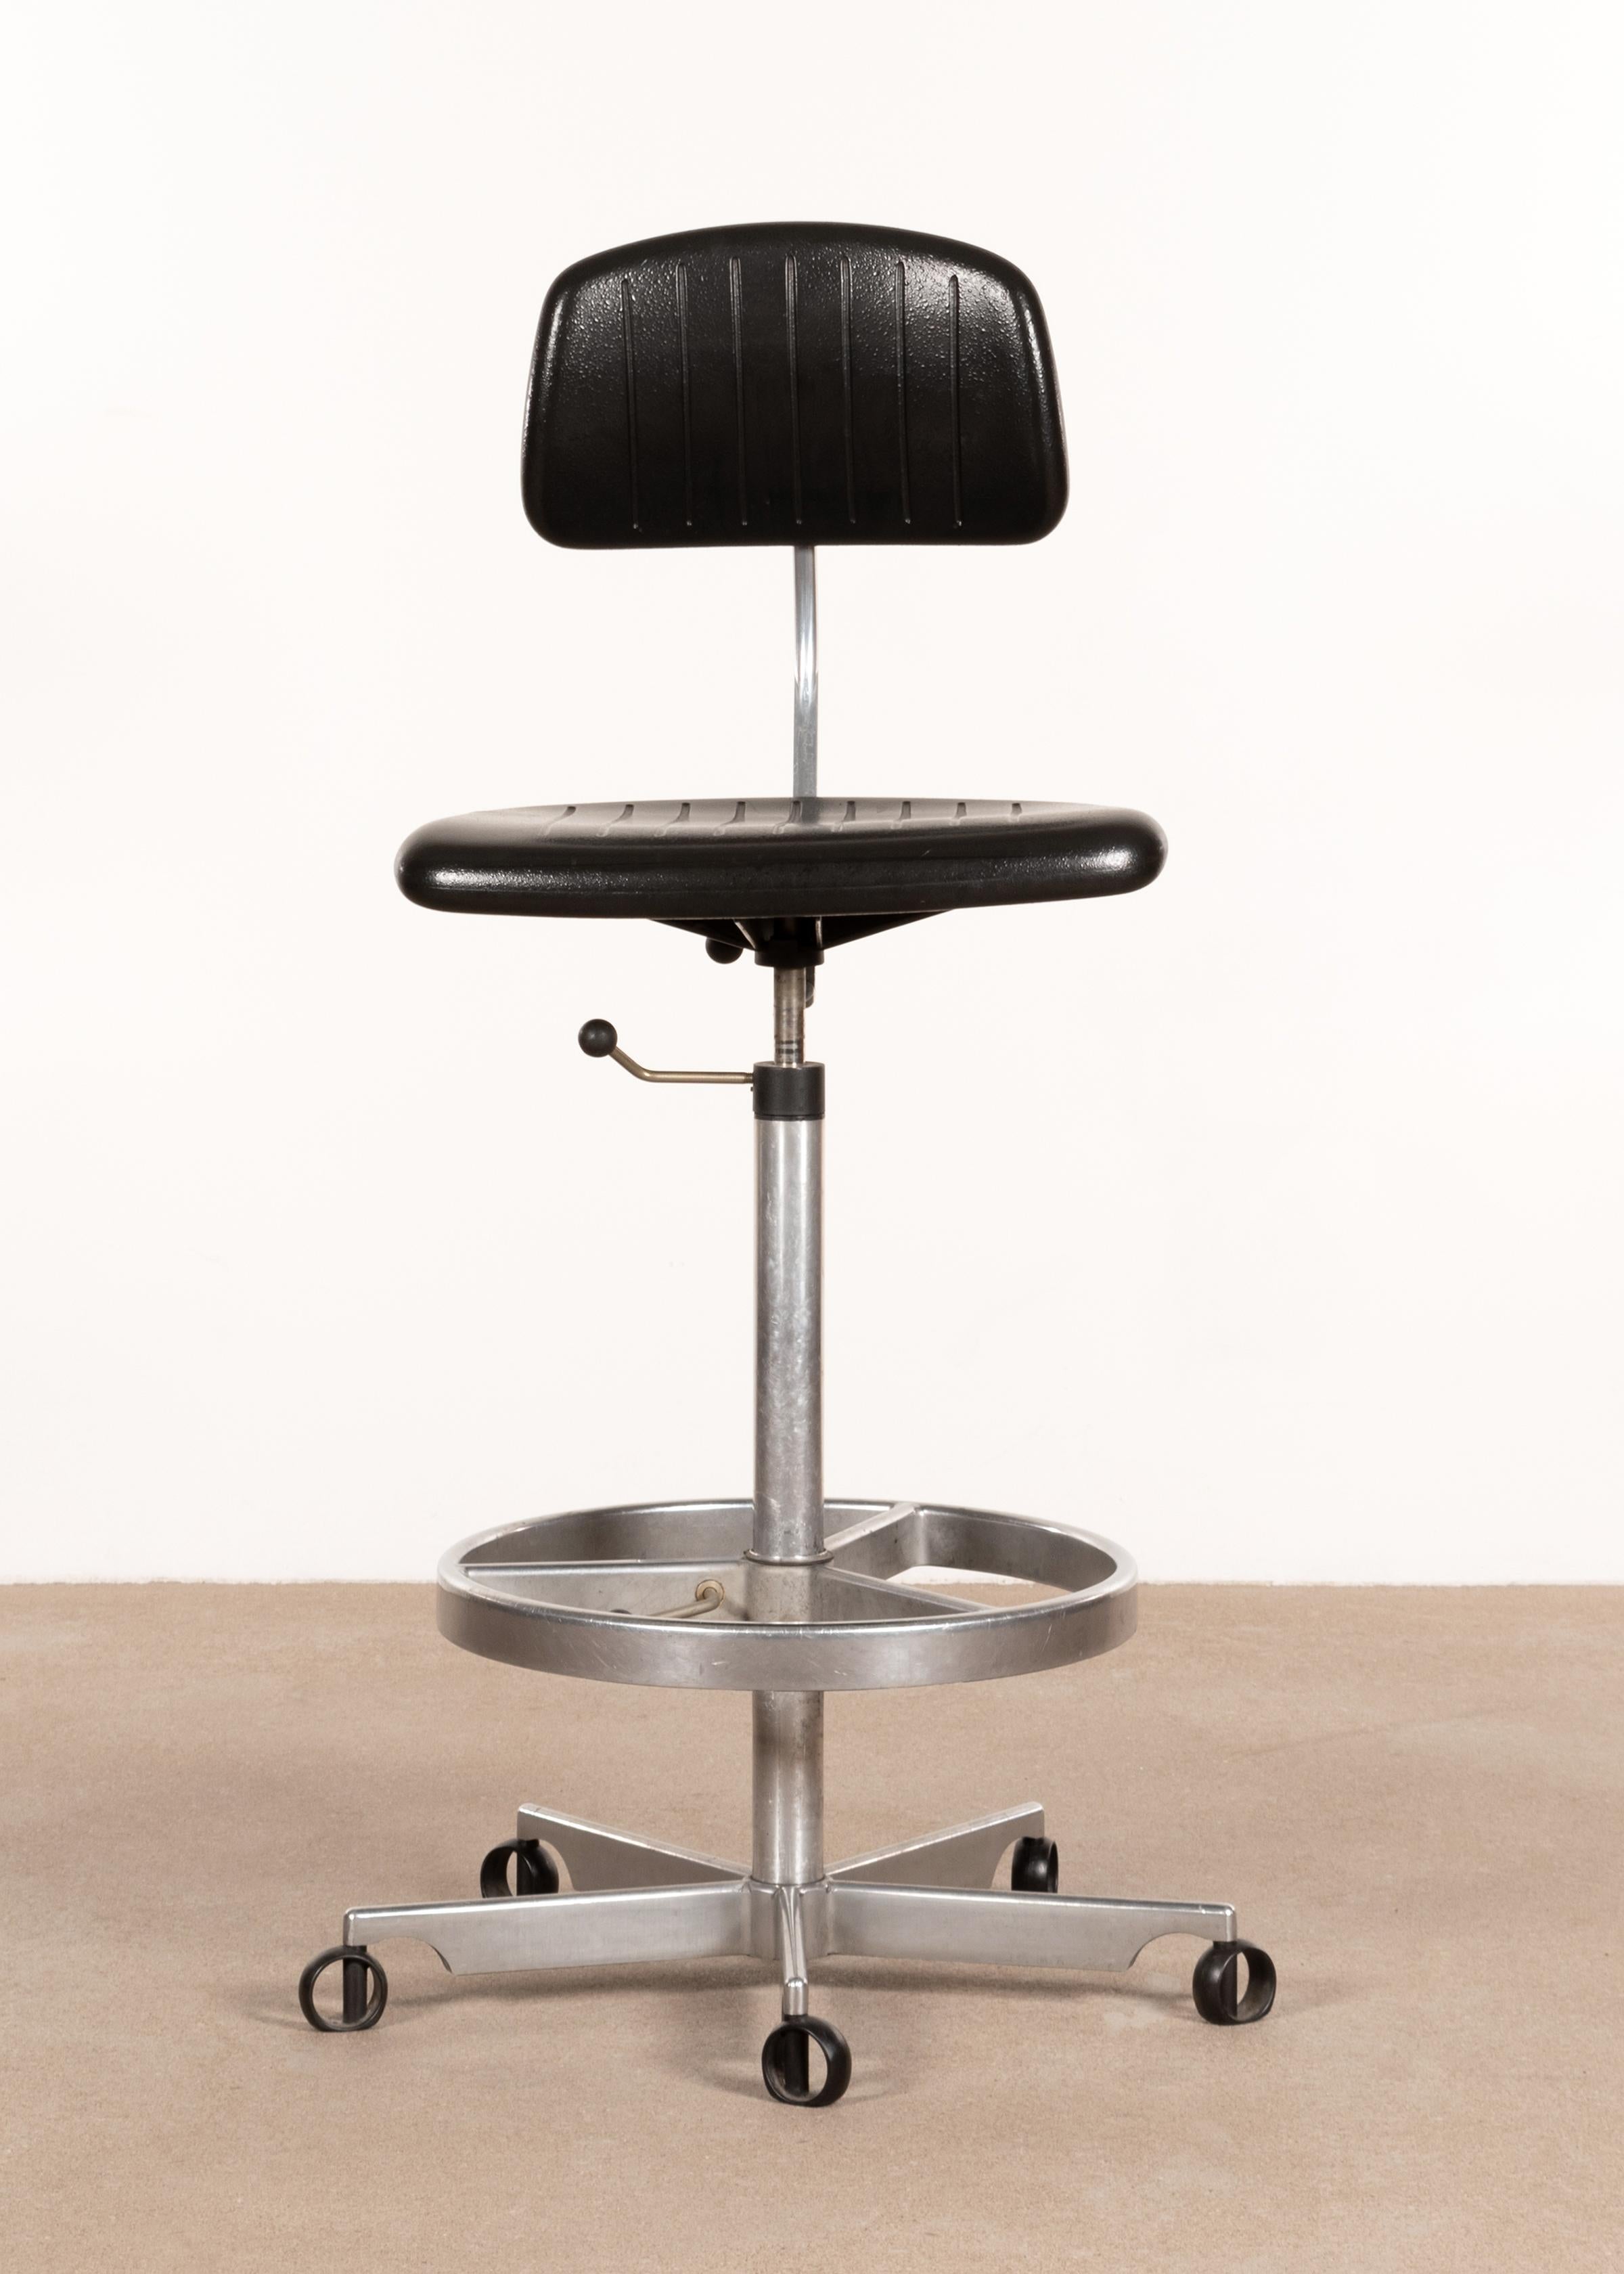 Drafting stool (work or bar) by Jorgen Rasmussen for Kevi Denmark. Aluminum frame with foam paded rubber seat and backrest all in good original condition.
Seating can be adjusted from 72 cm (28